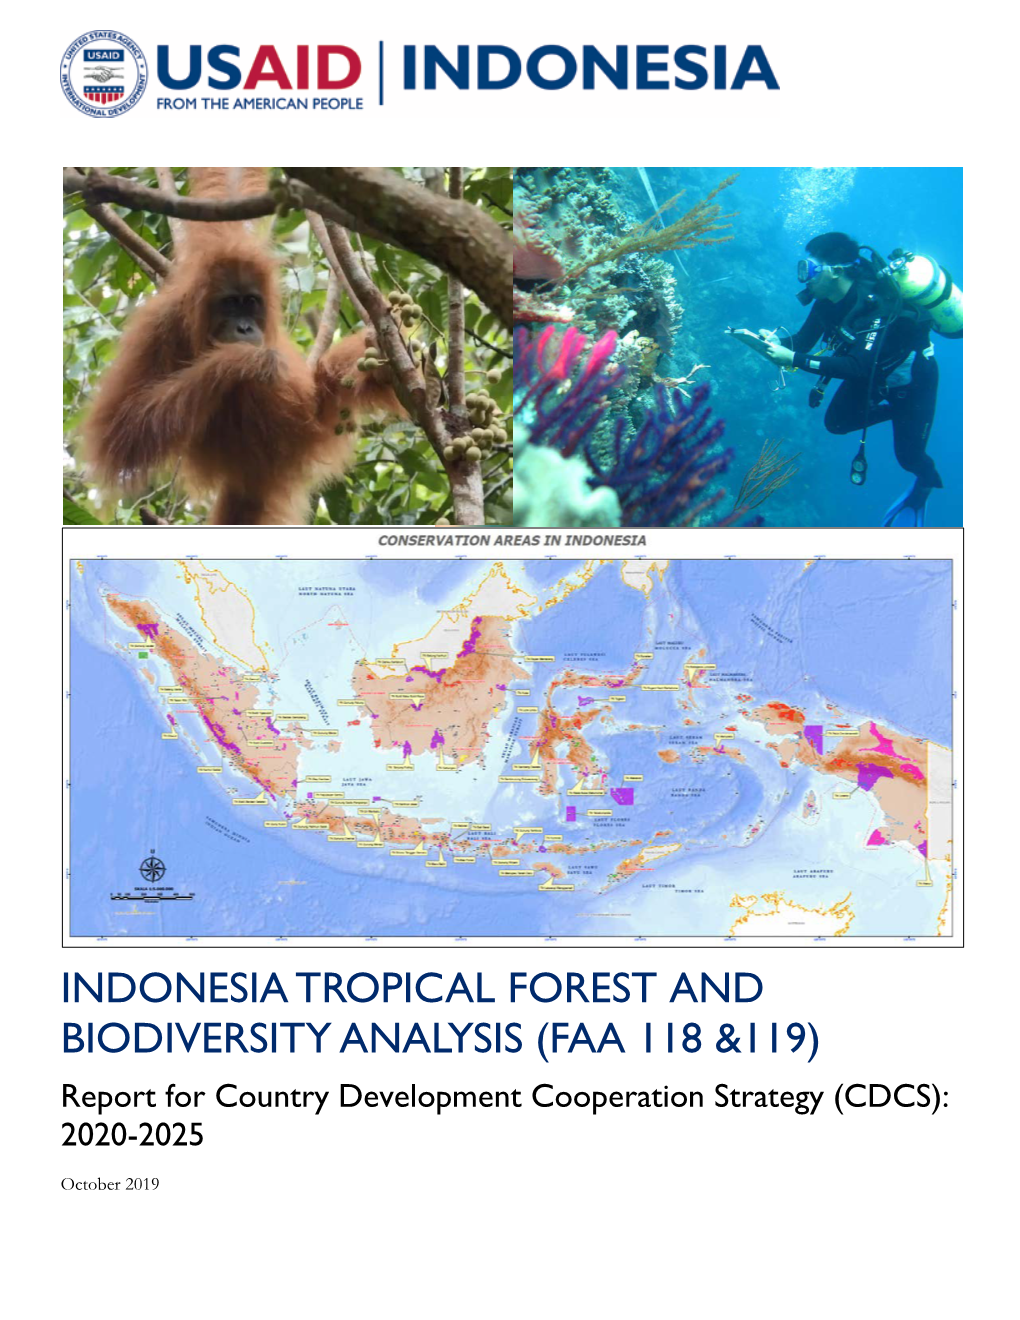 INDONESIA TROPICAL FOREST and BIODIVERSITY ANALYSIS (FAA 118 &119) Report for Country Development Cooperation Strategy (CDCS): 2020-2025